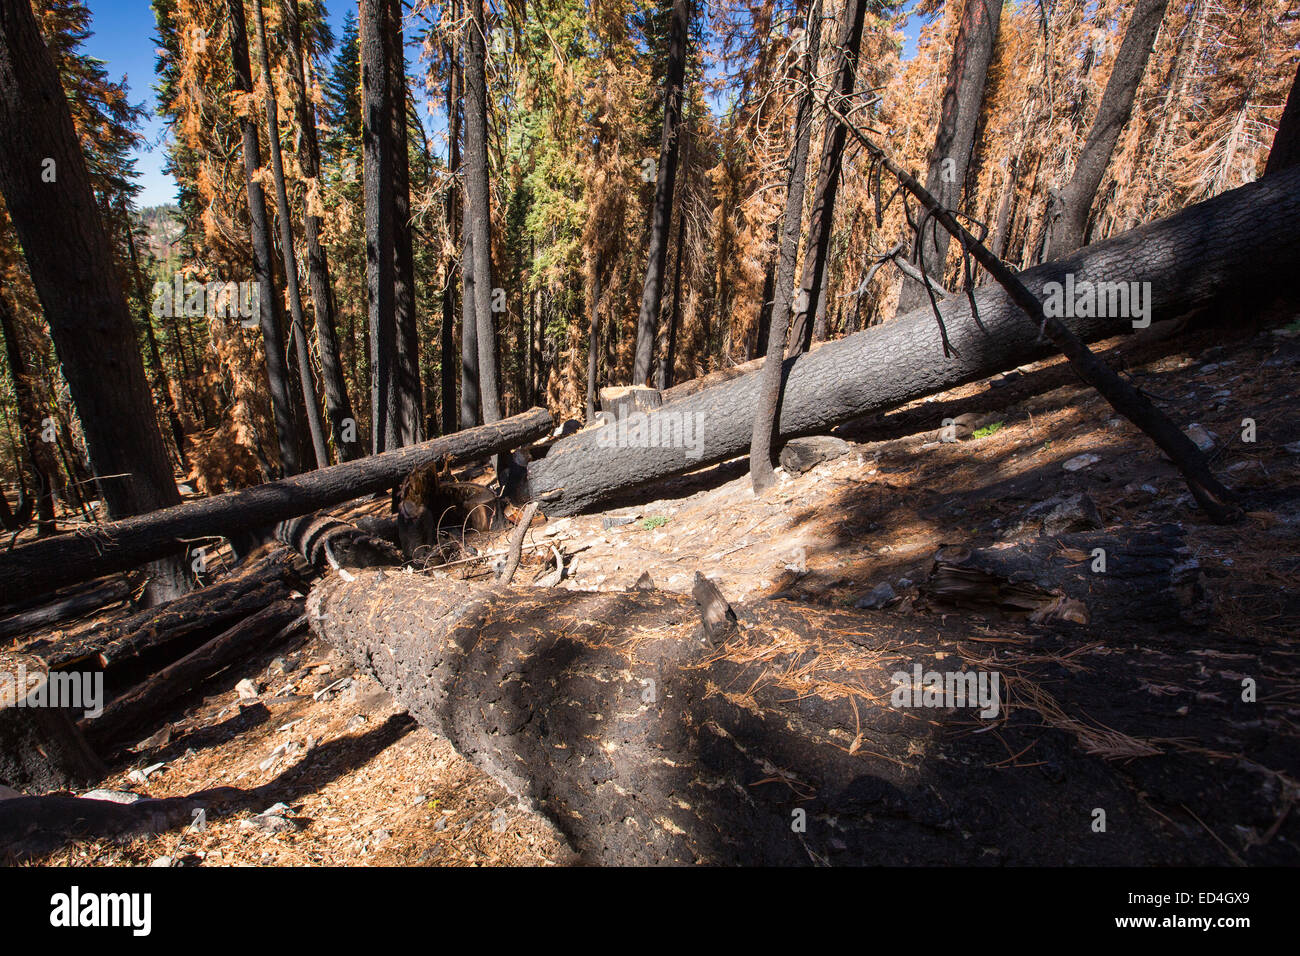 Wildfire damage in Yosemite National Park, California, USA. Most of California is in exceptional drought, the highest classification of drought, which has lead to an increasing number of wild fires. Stock Photo